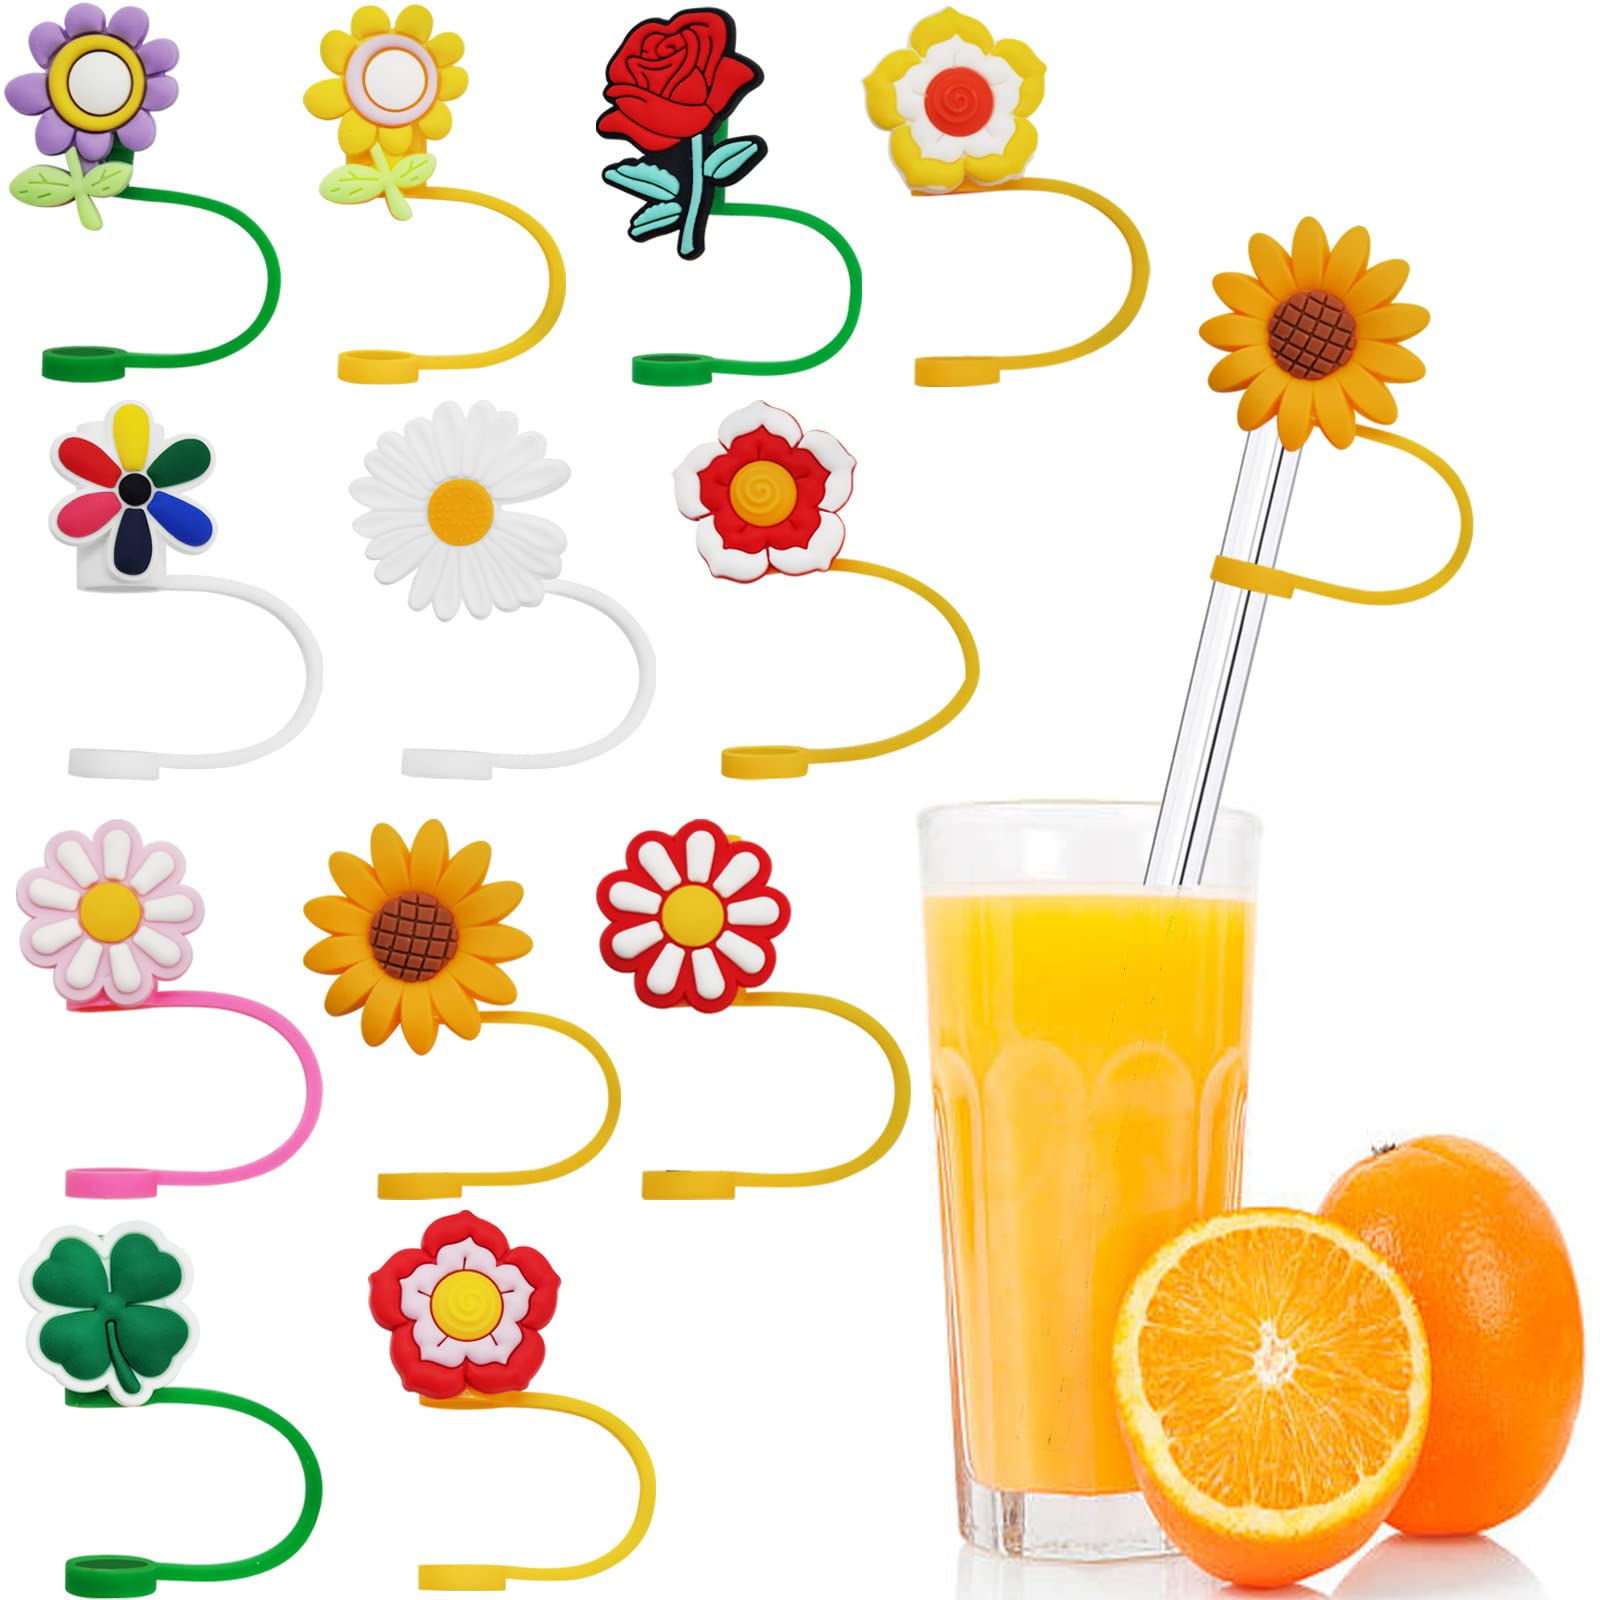 Silicone Straw Tips Cover-12 Pack Reusable Straw Covers Cap Cute Colorful Flowers Silicone Drinking Straw Tips Lids Portable Dust-Proof Straw Plugs for7 to 8 mm Straws for Decor Outdoor(flower shape)